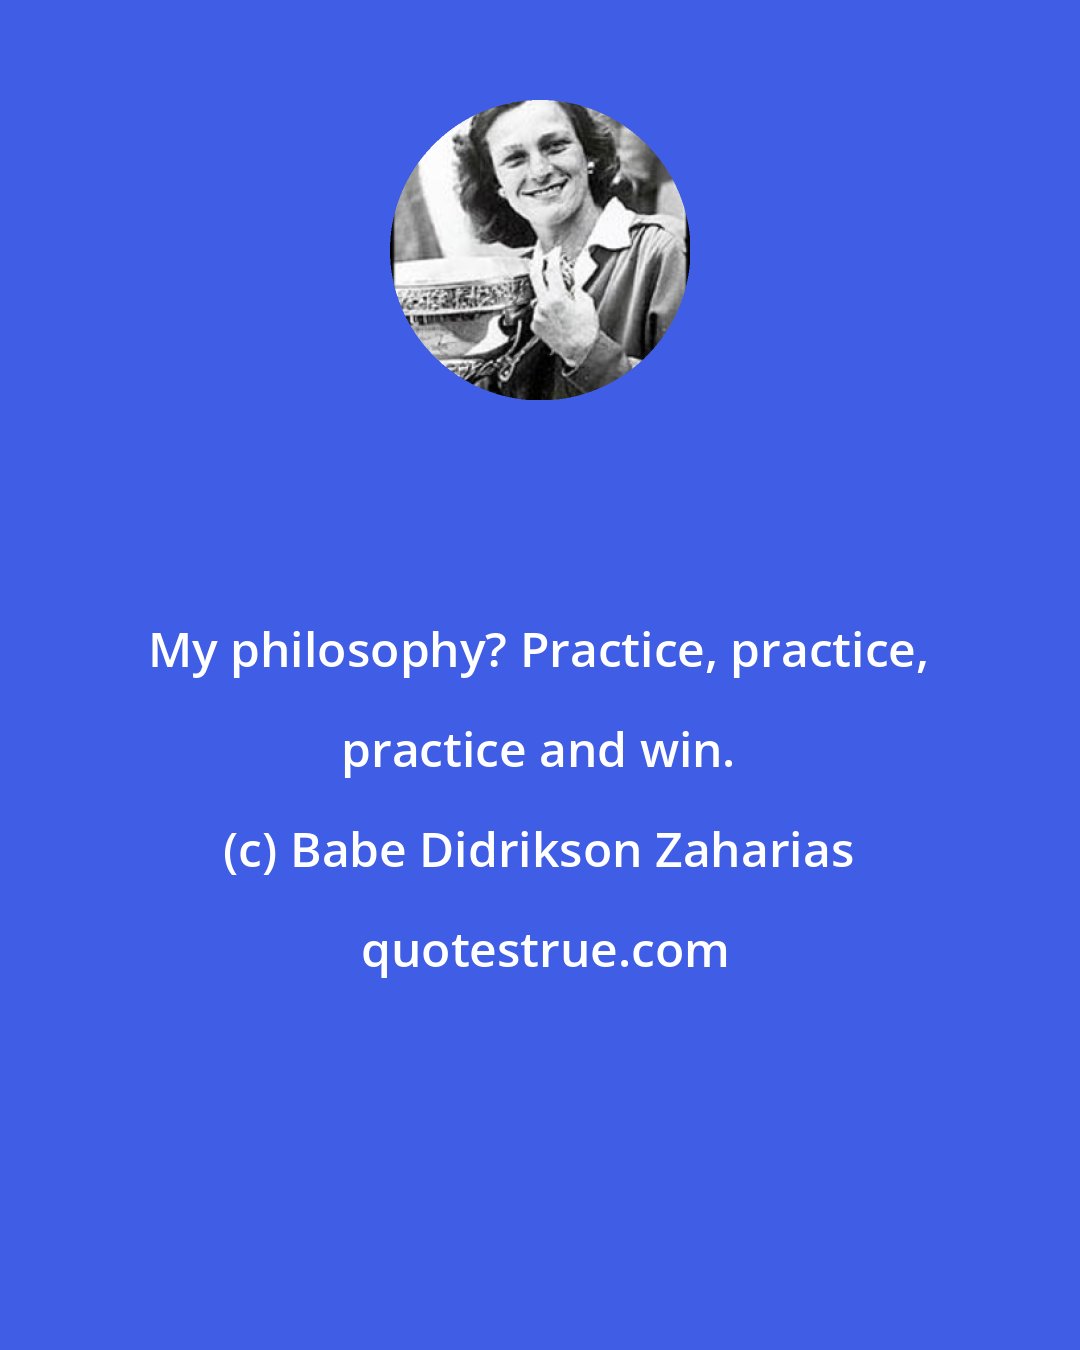 Babe Didrikson Zaharias: My philosophy? Practice, practice, practice and win.